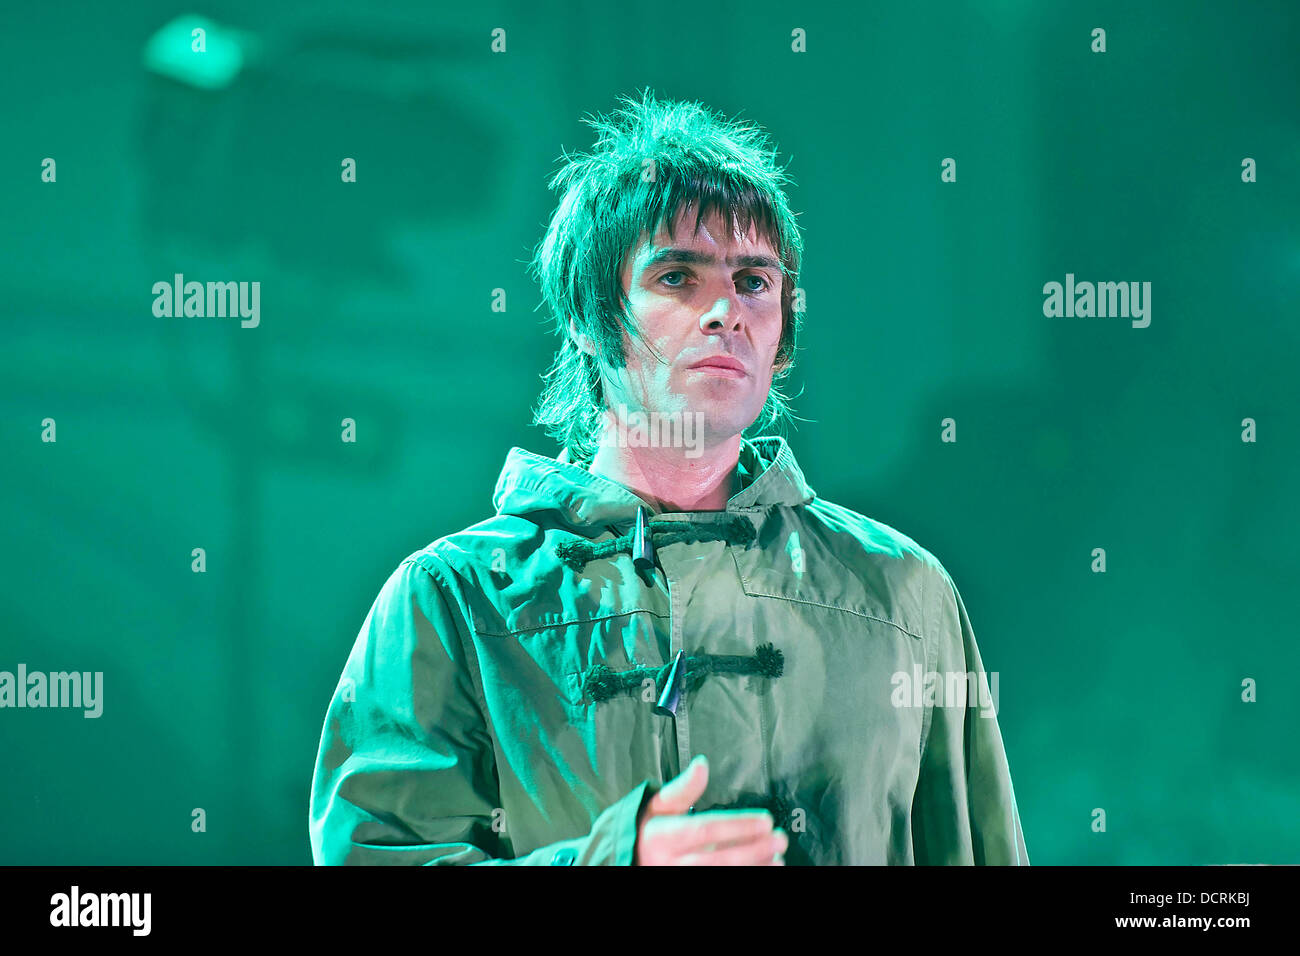 Liam Gallagher de Beady Eye performing live at Brixton Academy. Londres, Angleterre - 17.11.11 Banque D'Images